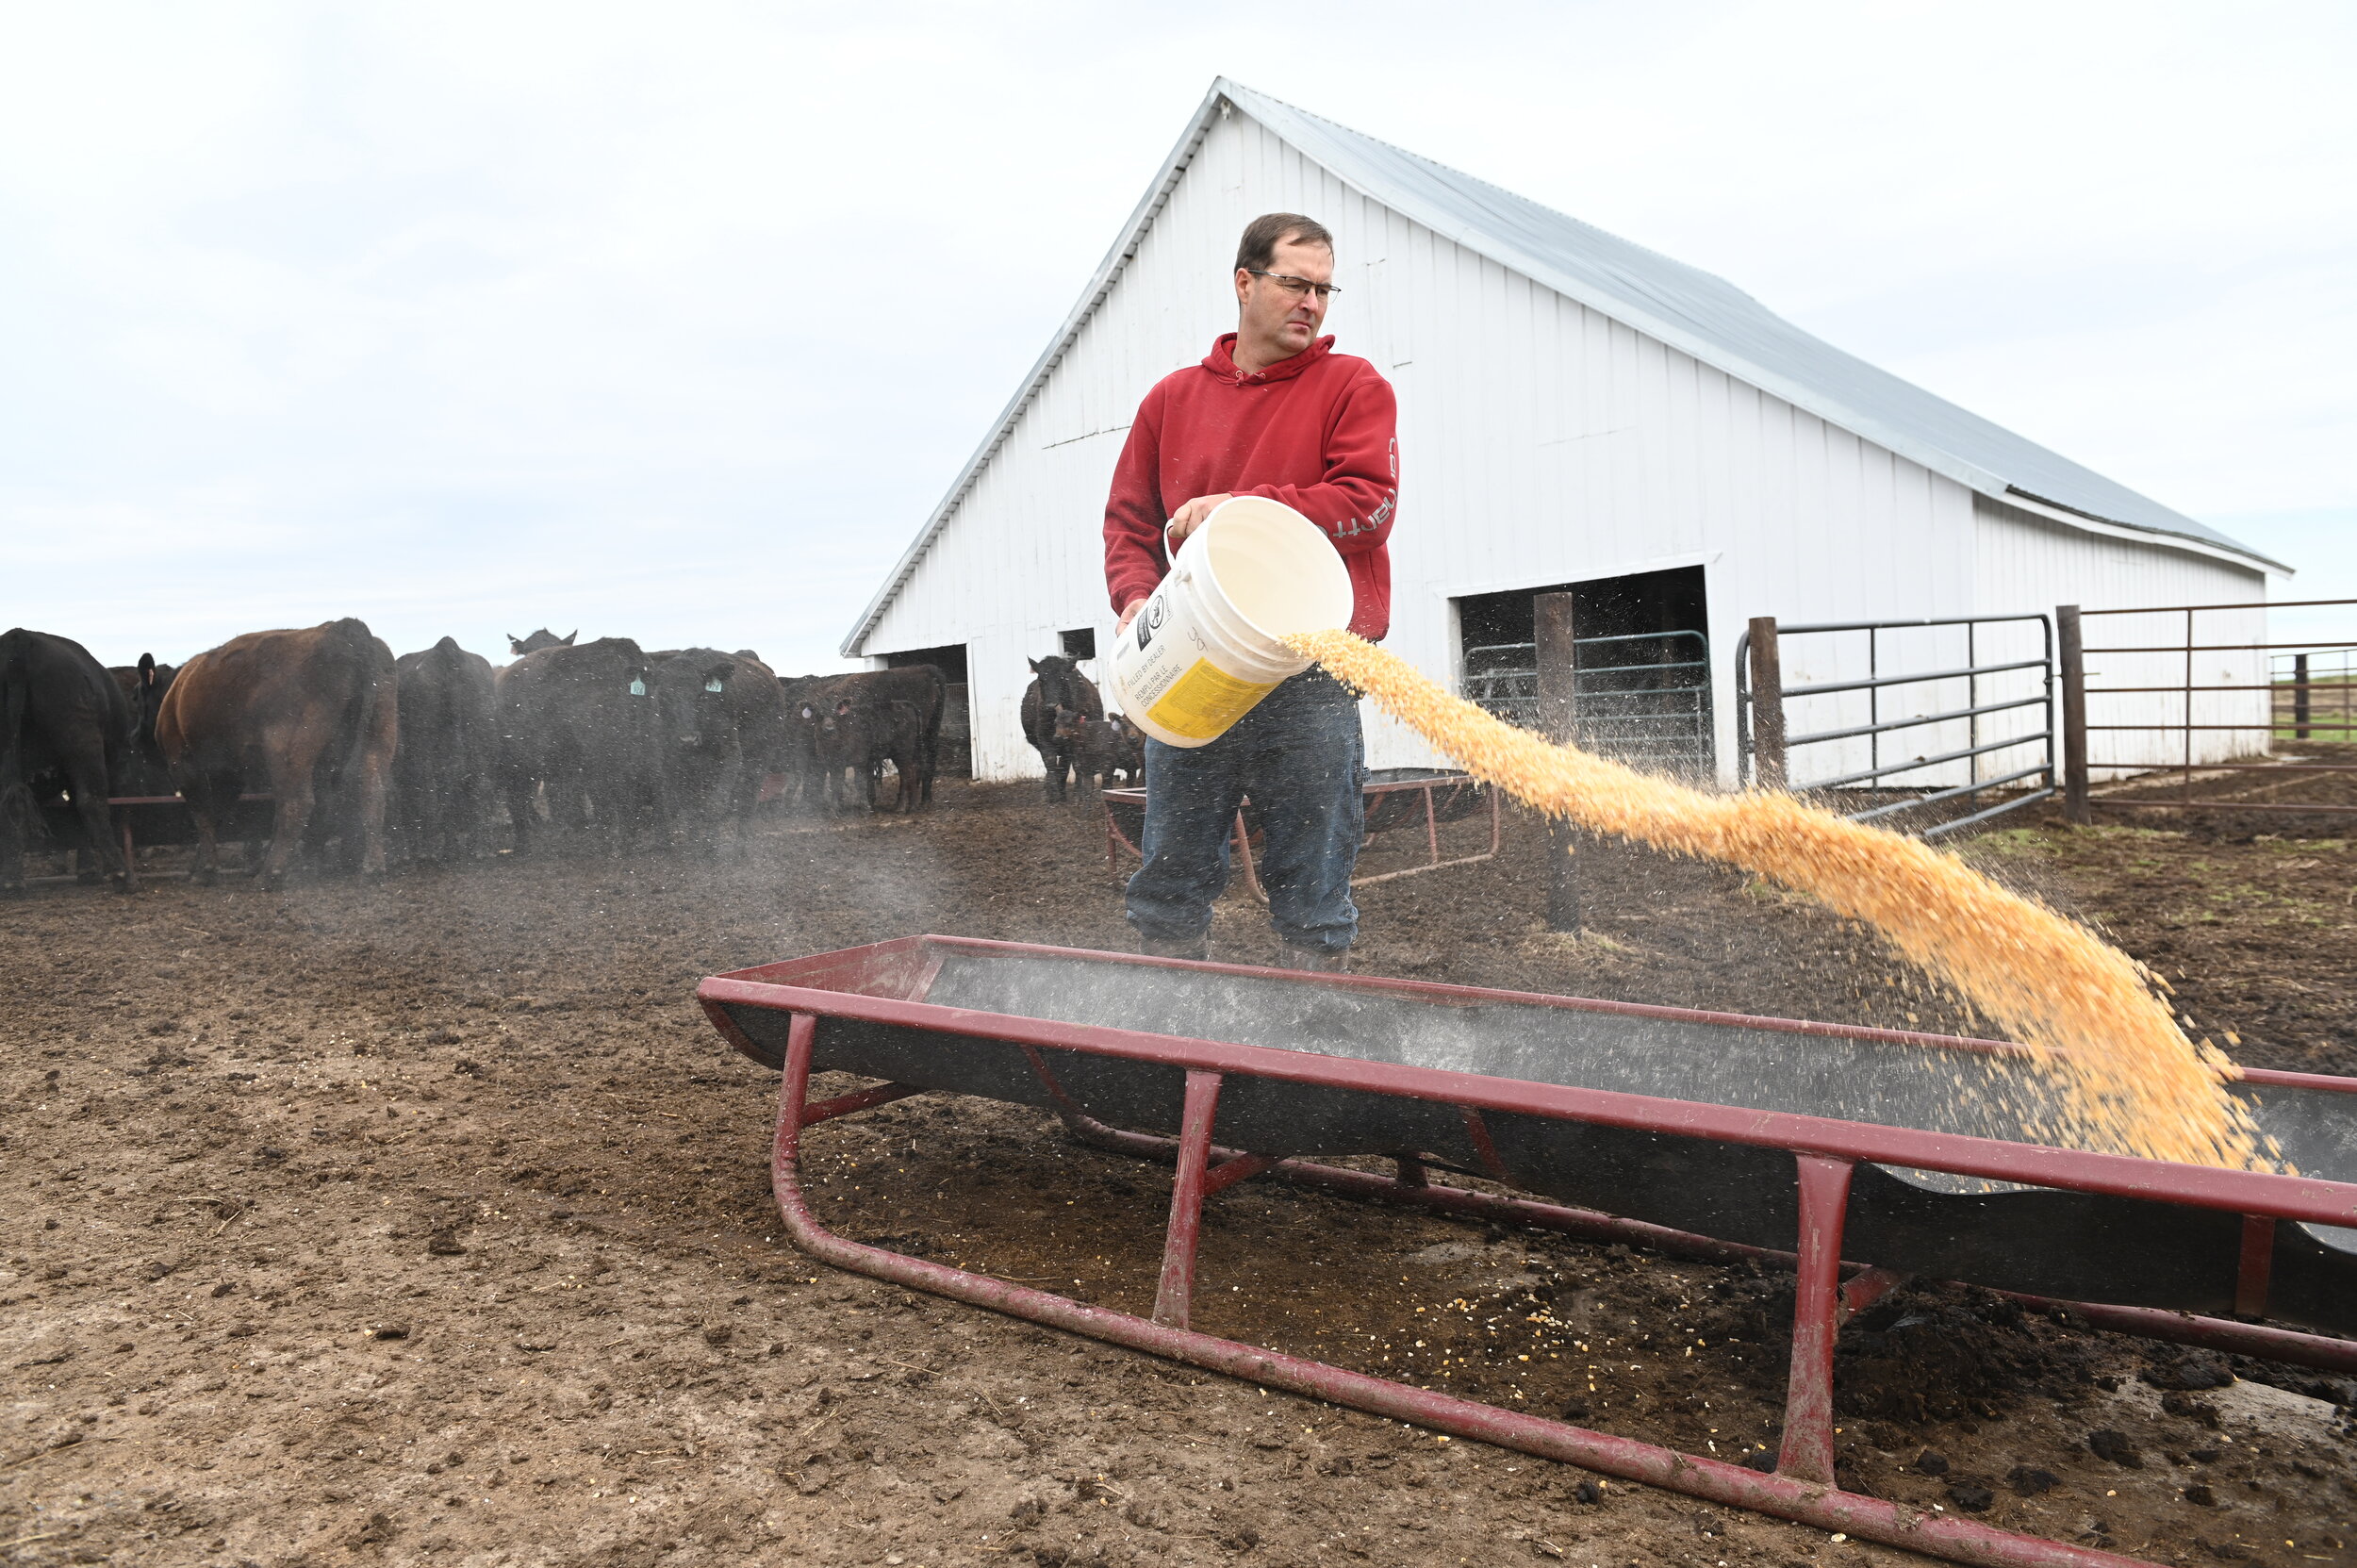  Jeff Jorgenson, a farmer from Fremont County and President of the Iowa Soybean Association, feeds his cattle earlier this spring. 